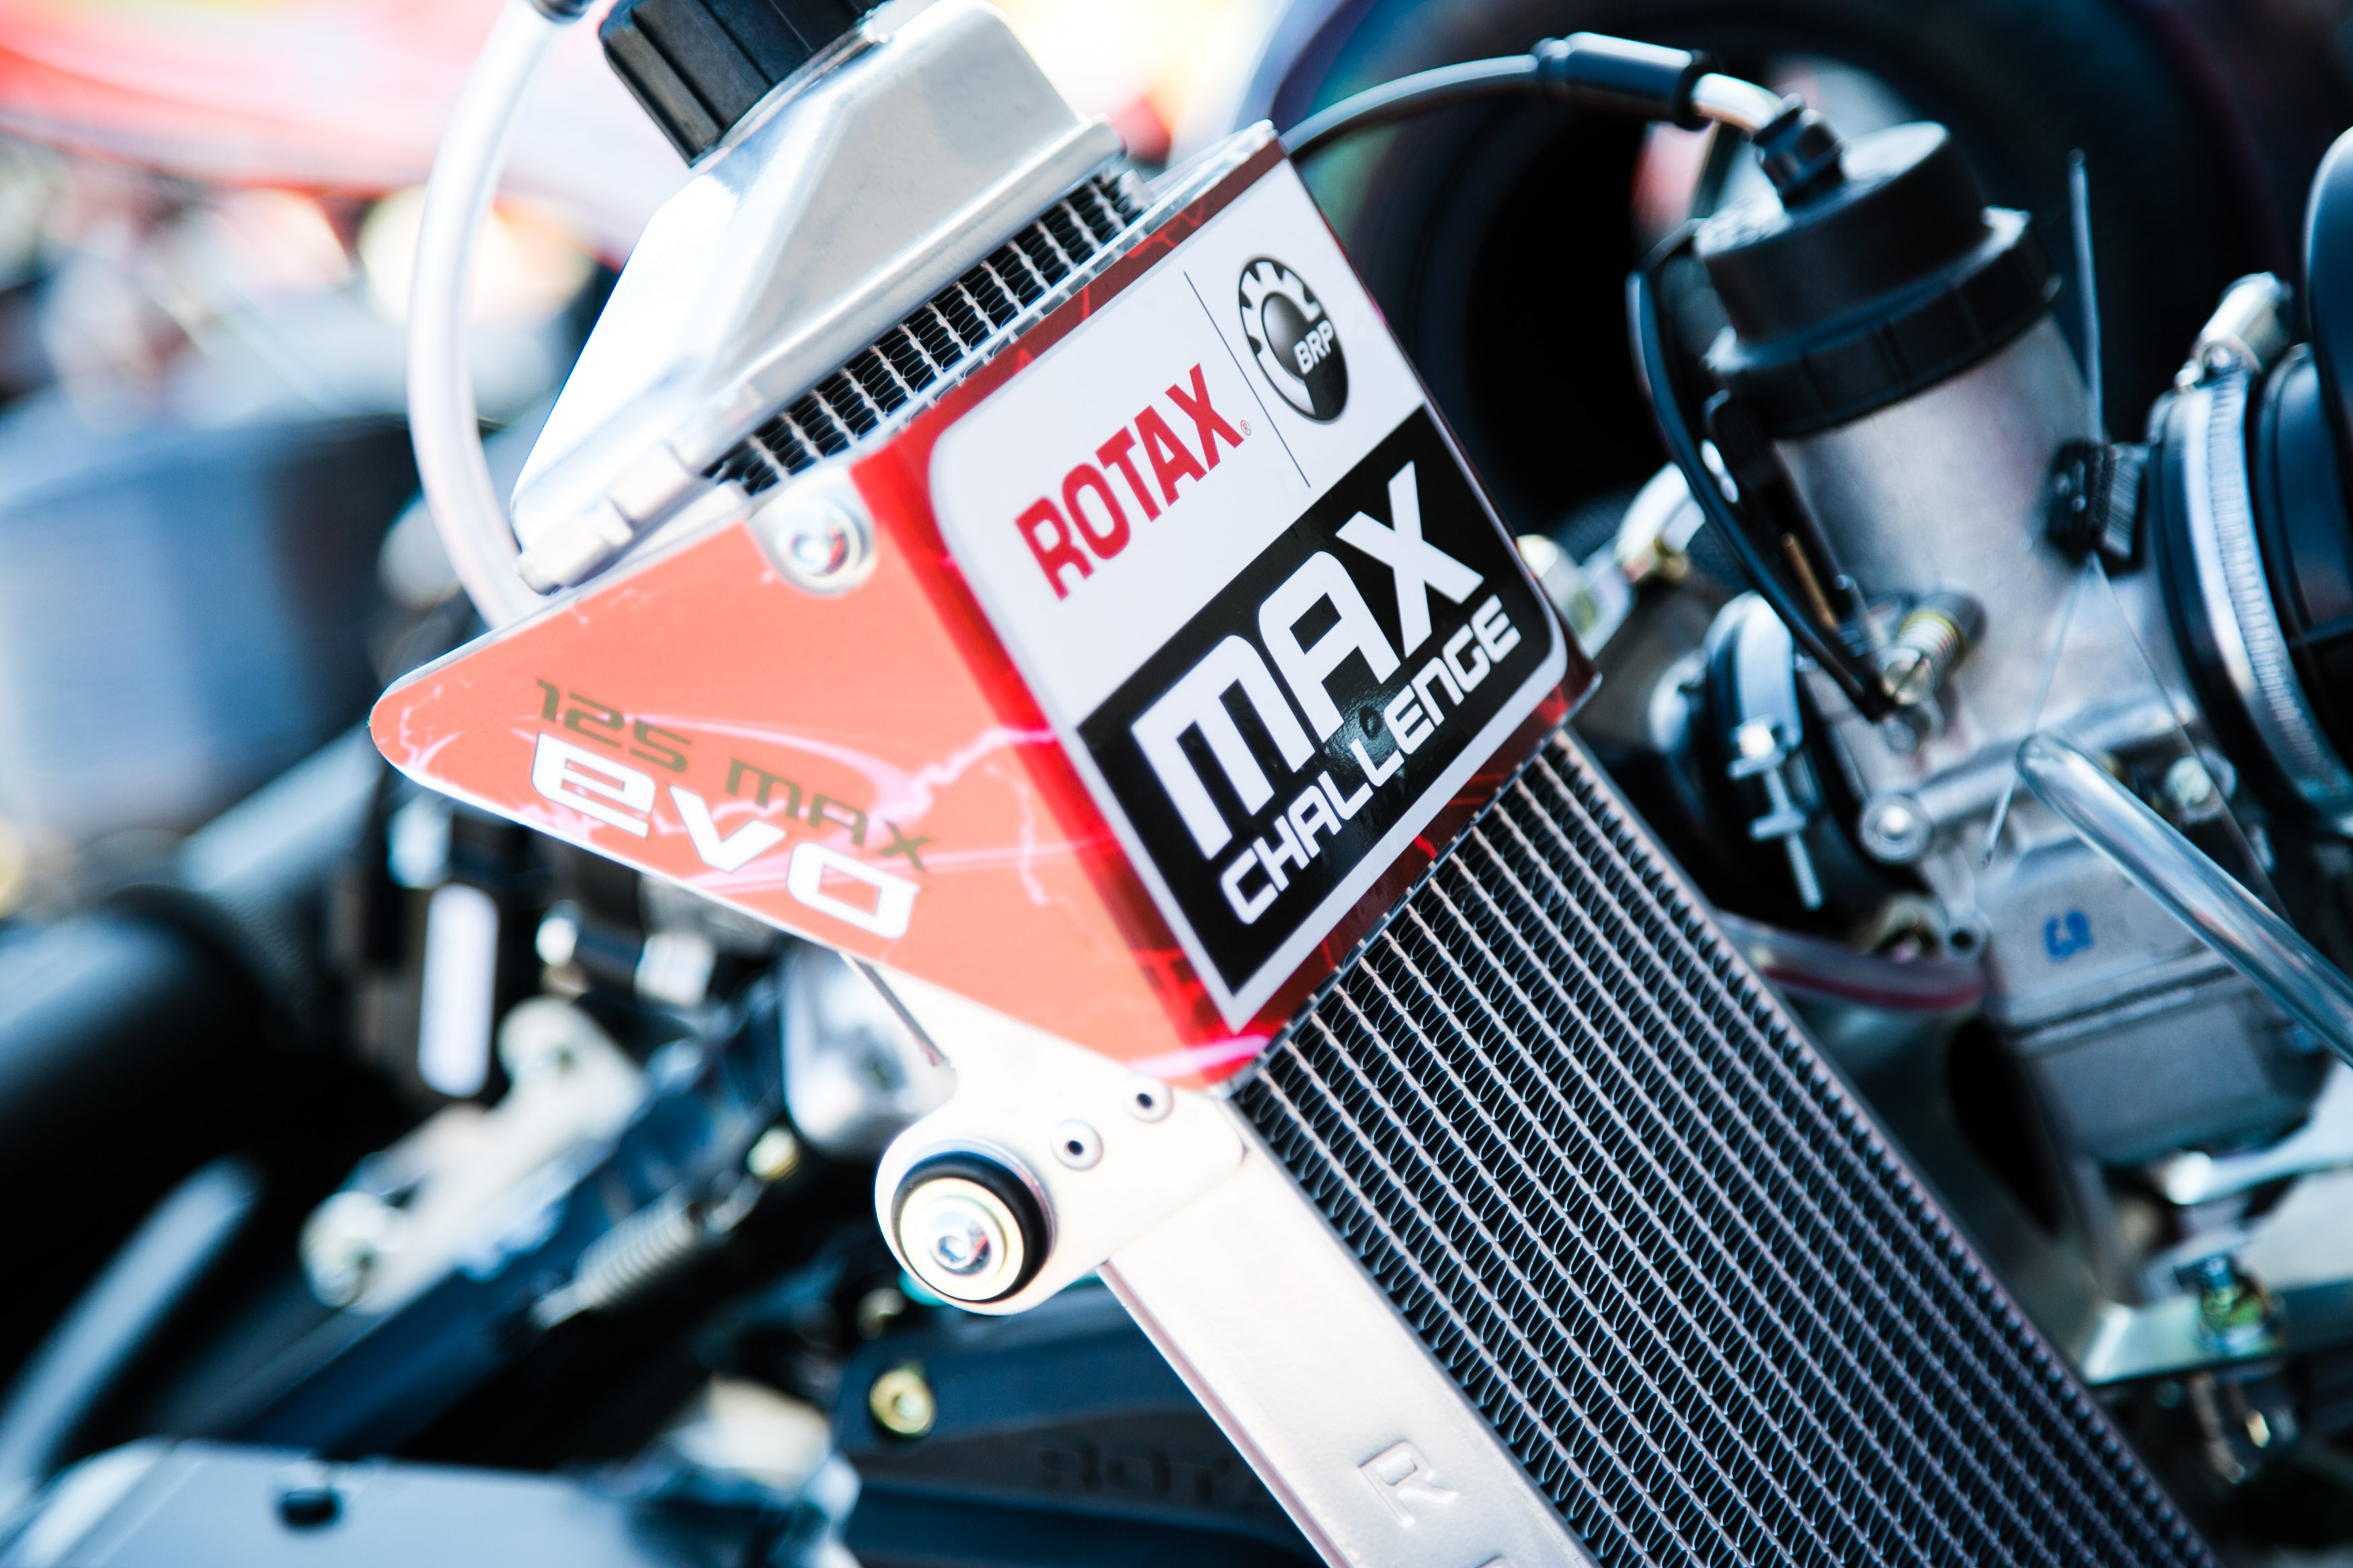 Questions & Answers About The Rotax 125 MAX EVO Engine